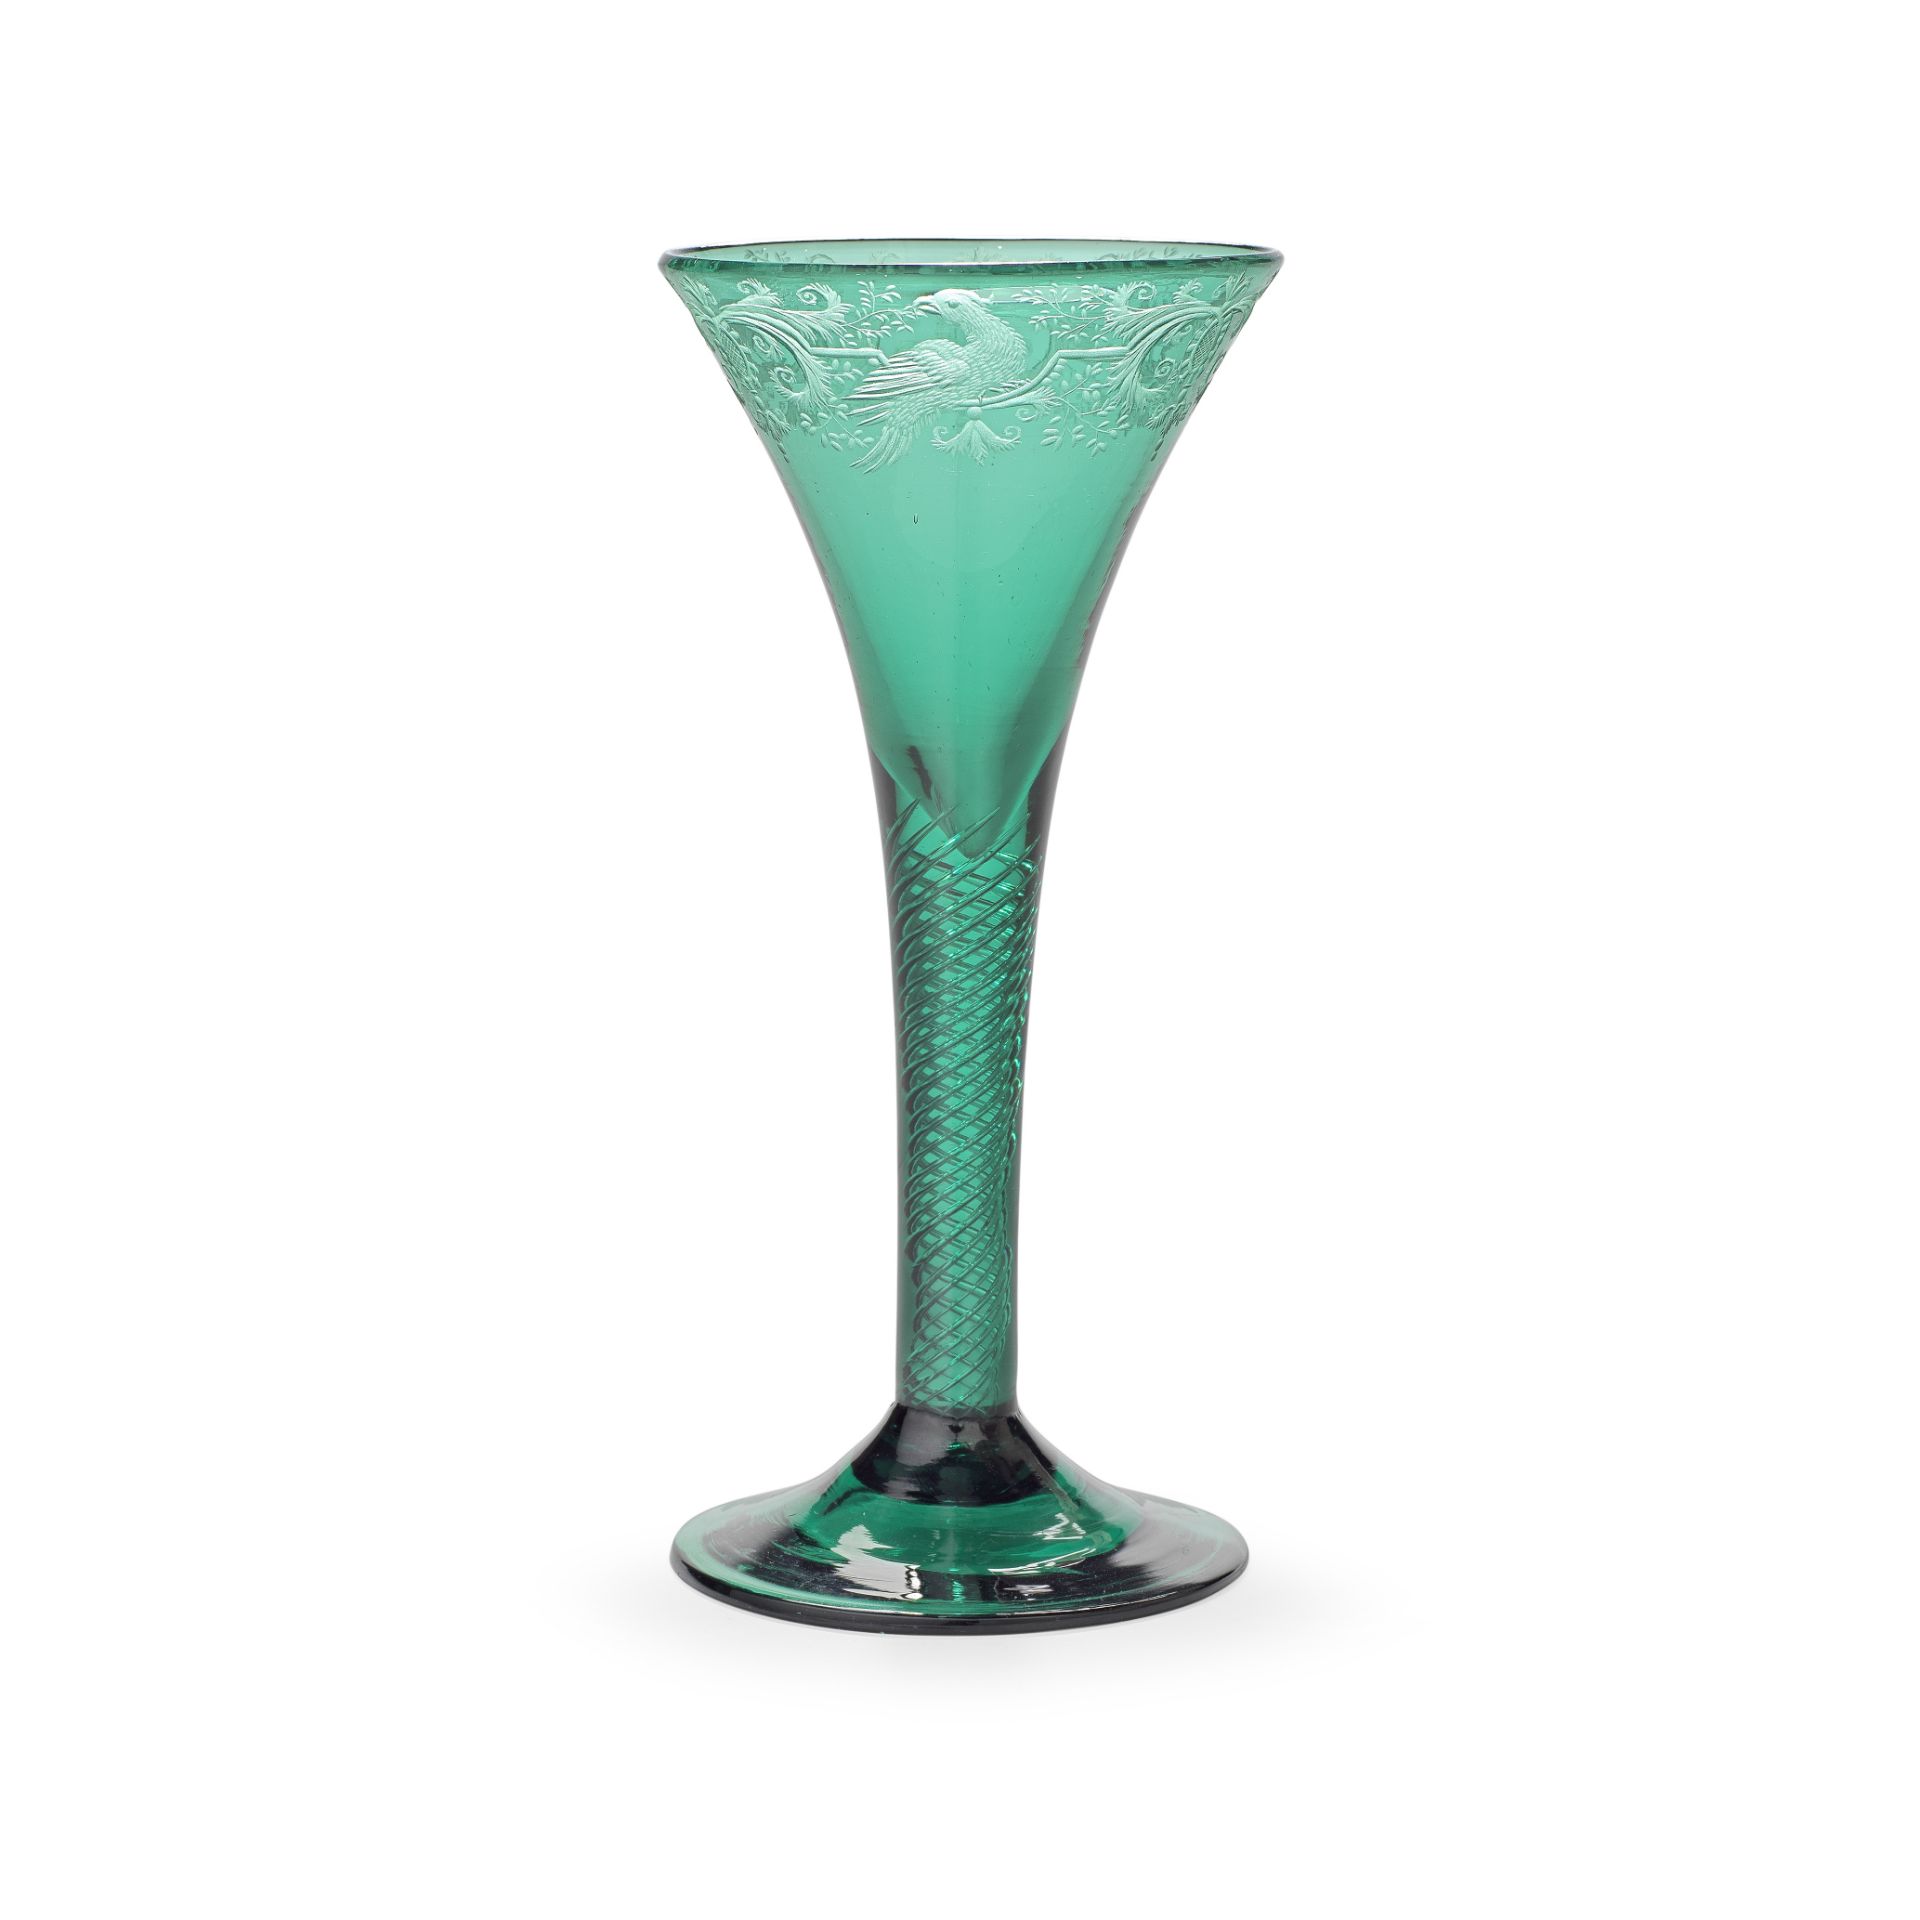 An exceptional emerald-green engraved airtwist wine glass, circa 1750